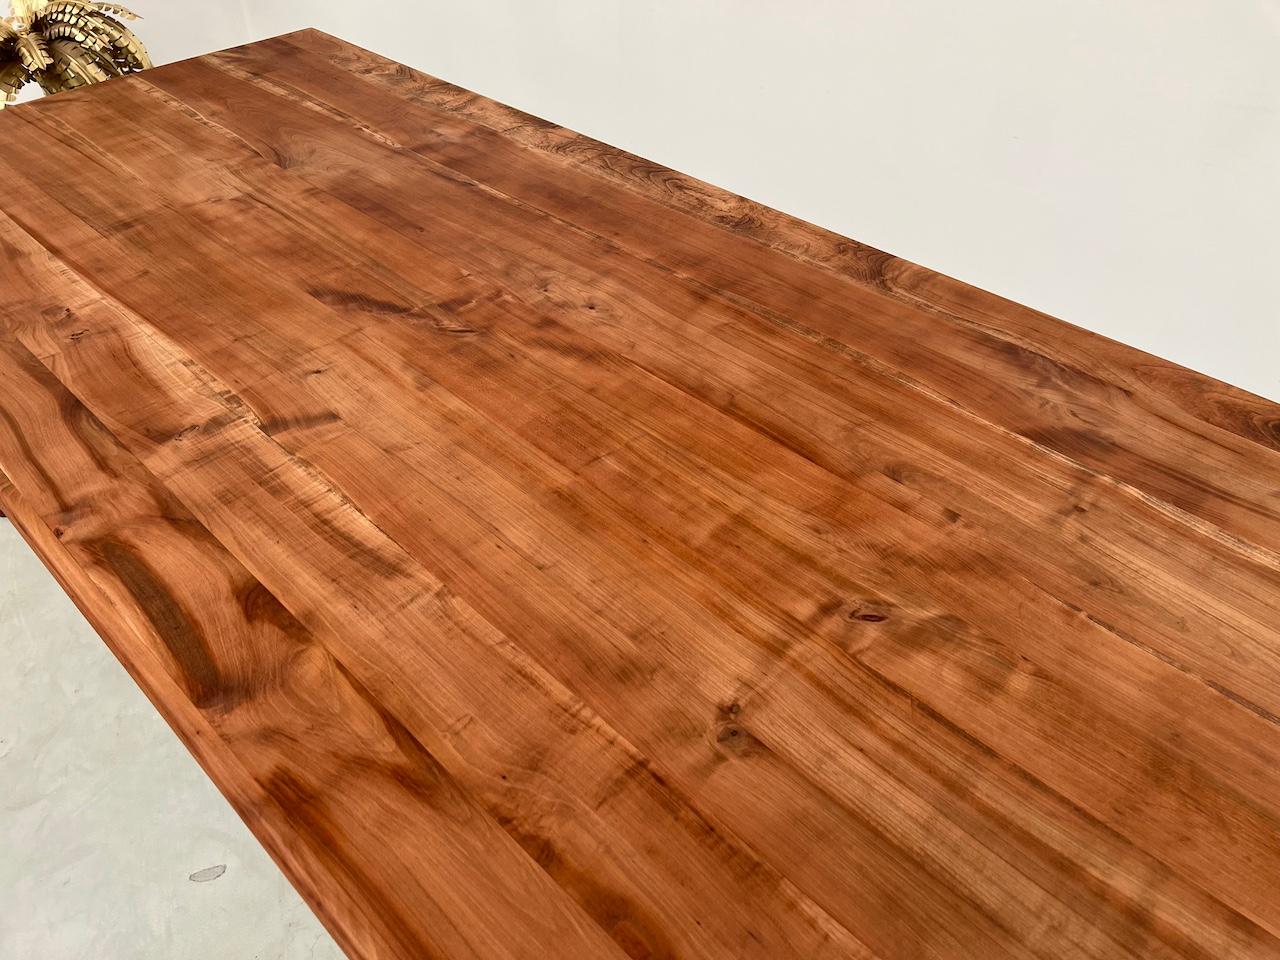 Large solid cherry farm table, 250 x 110 cm For Sale 1